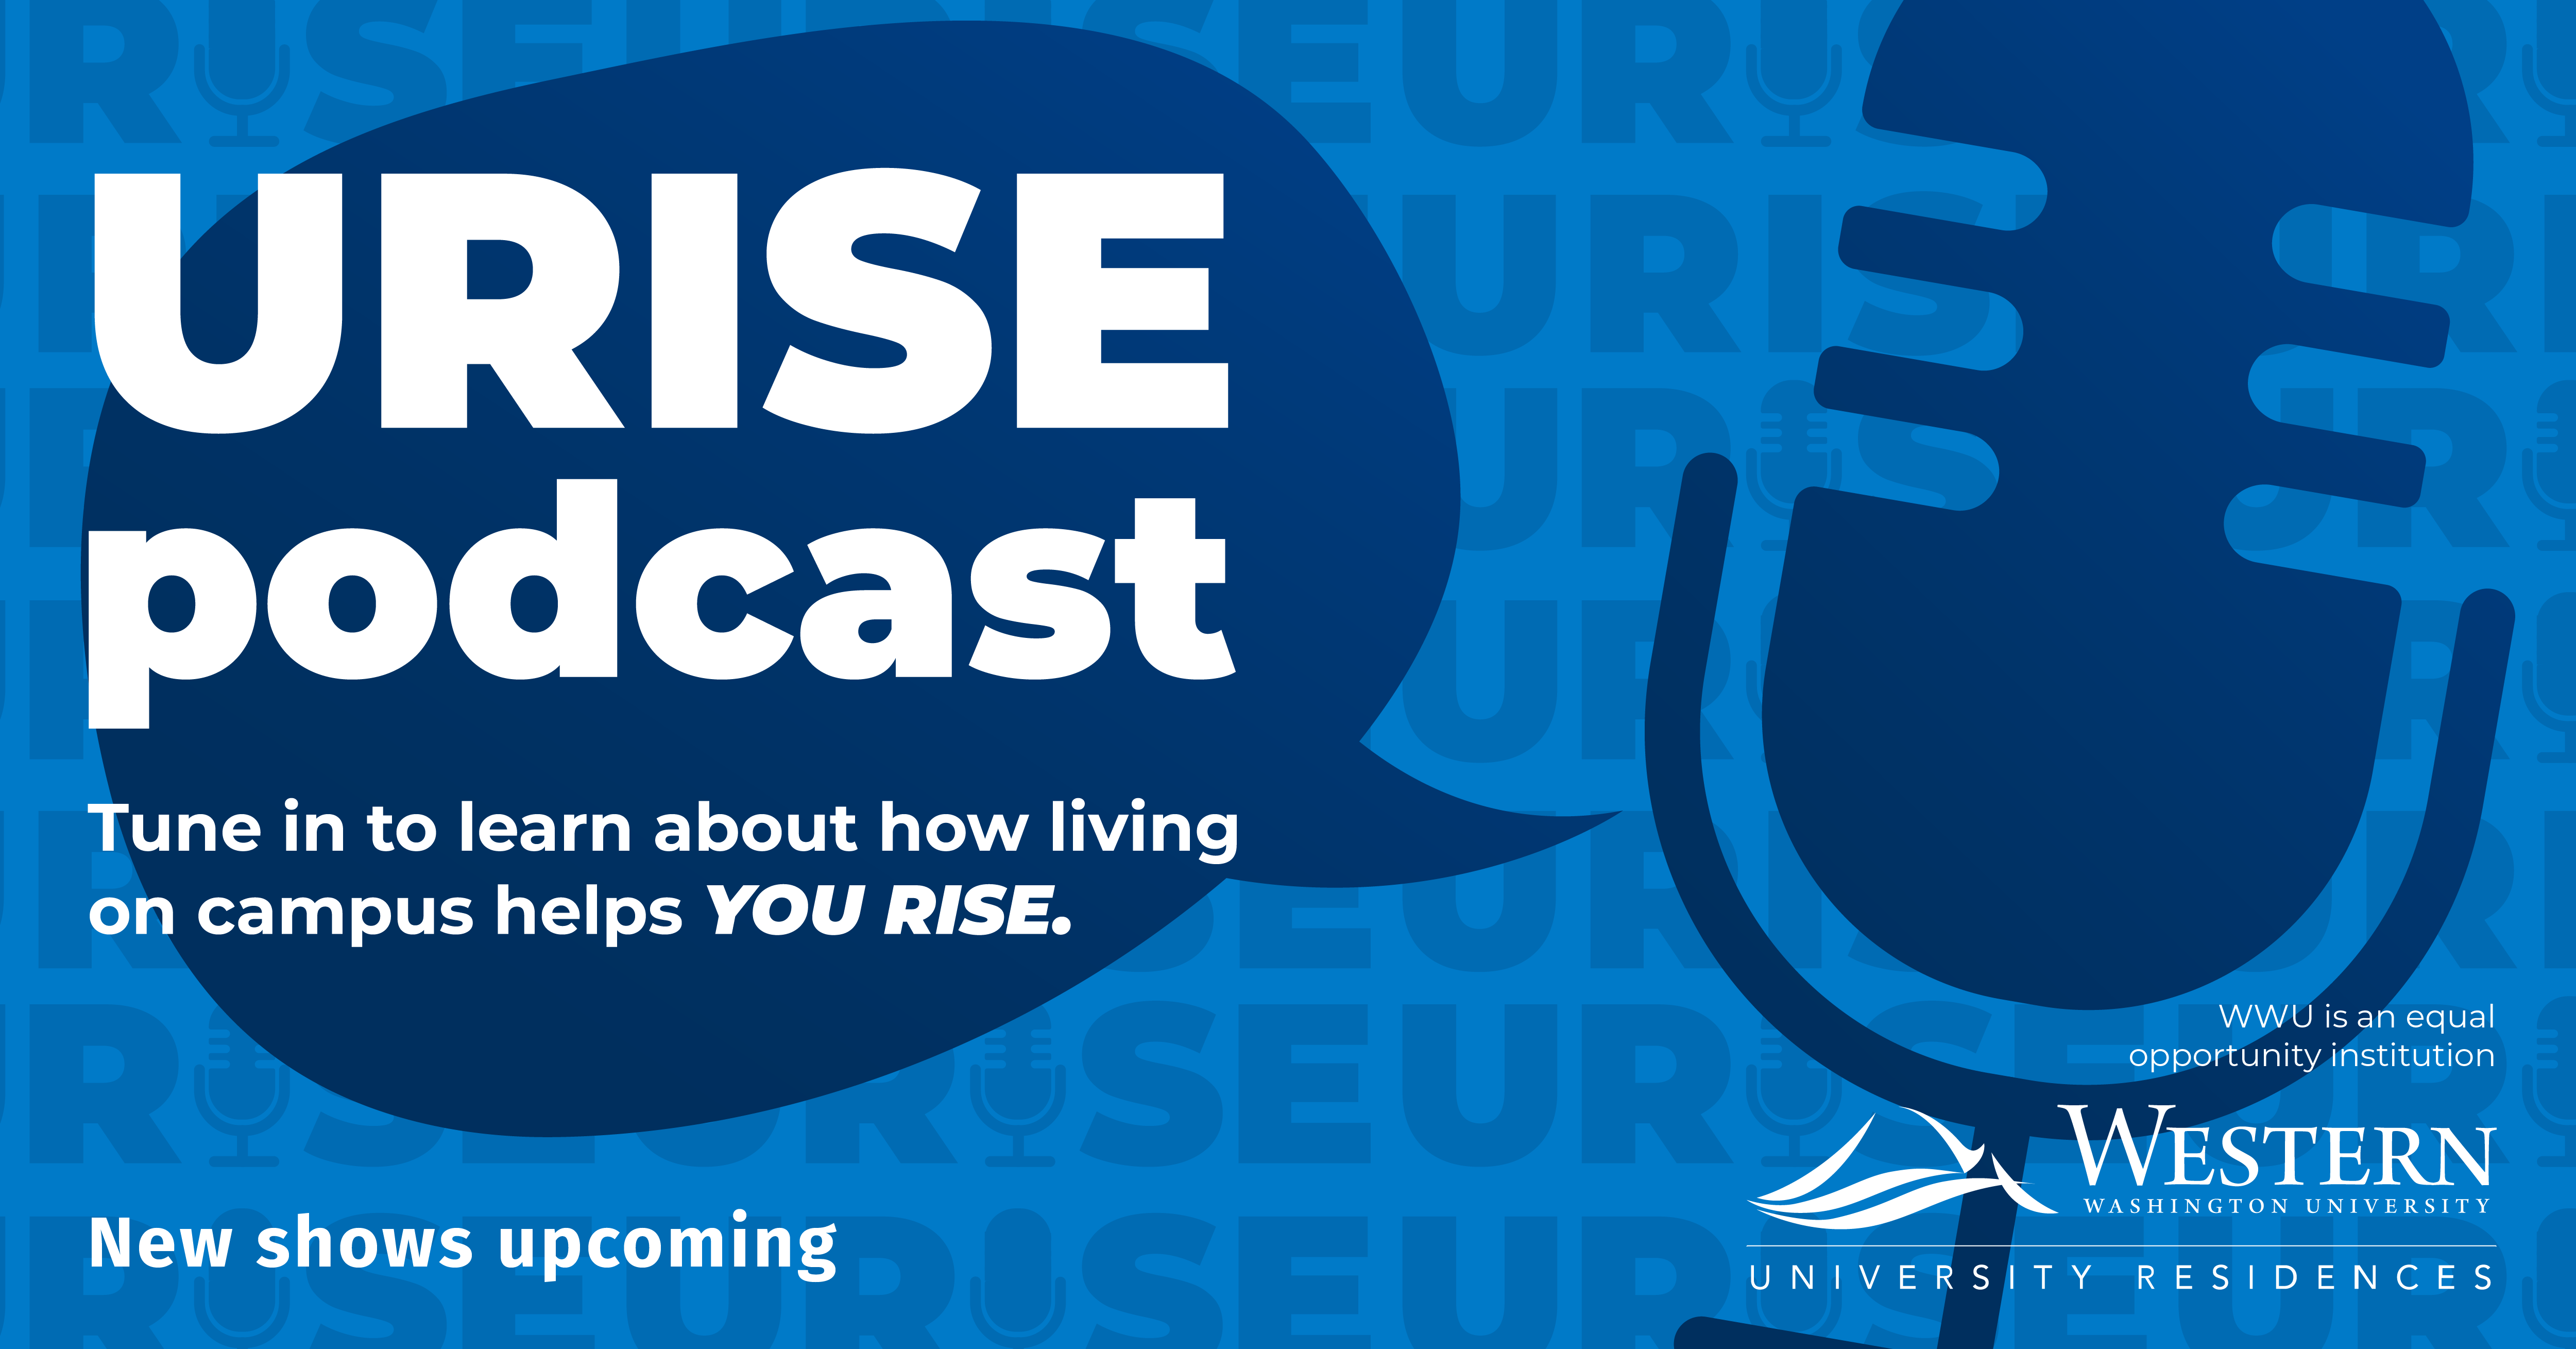 URISE podcast graphic saying "New shows upcoming"